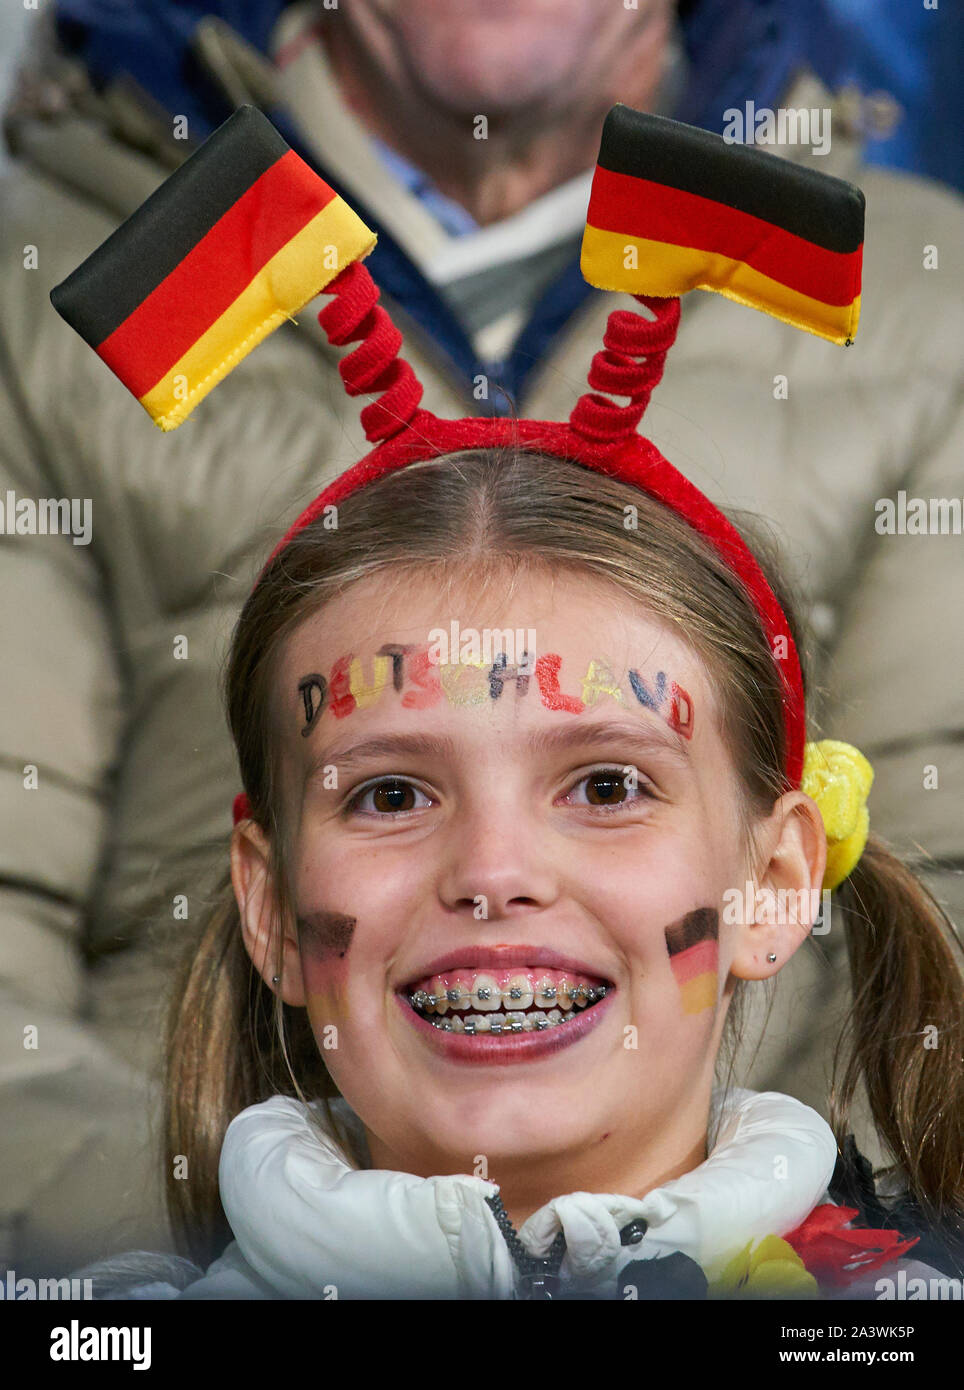 Germany- Argentina, Soccer, Dortmund, October 09, 2019 Fan, young girl with make-up and brace GERMANY - ARGENTINA 2-2 friendly match,  German Football National team, DFB , Season 2019/2020,  October 09, 2019 in Dortmund, Germany. © Peter Schatz / Alamy Live News Stock Photo